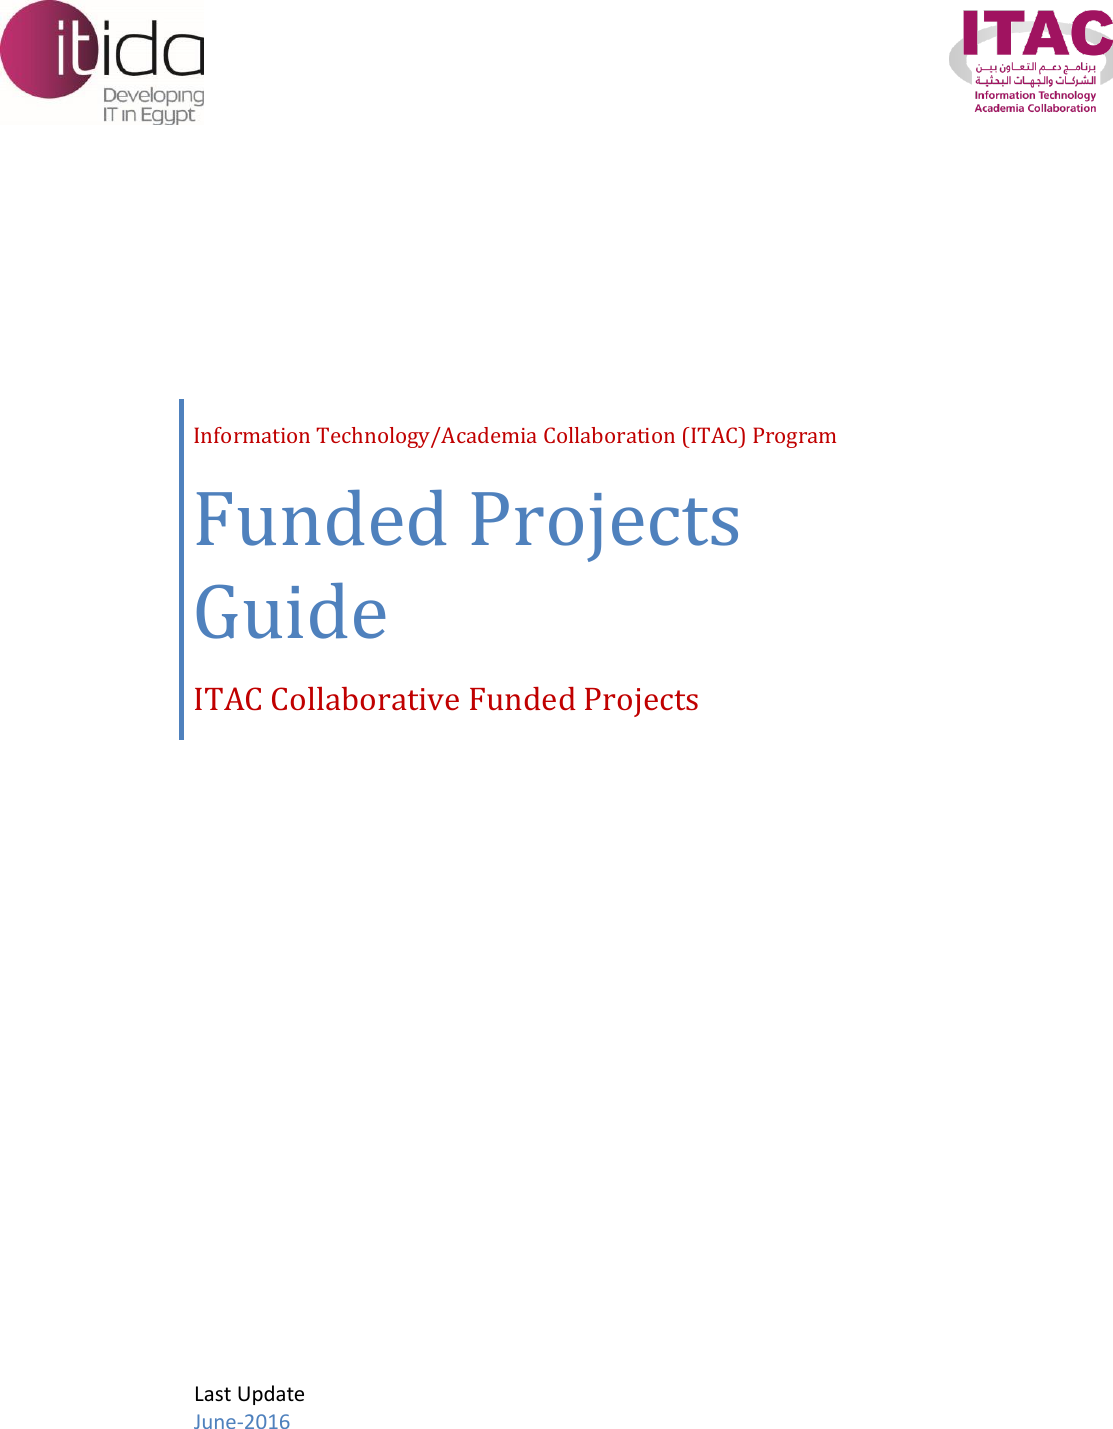 Page 1 of 8 - Funded Projects Guide 2016